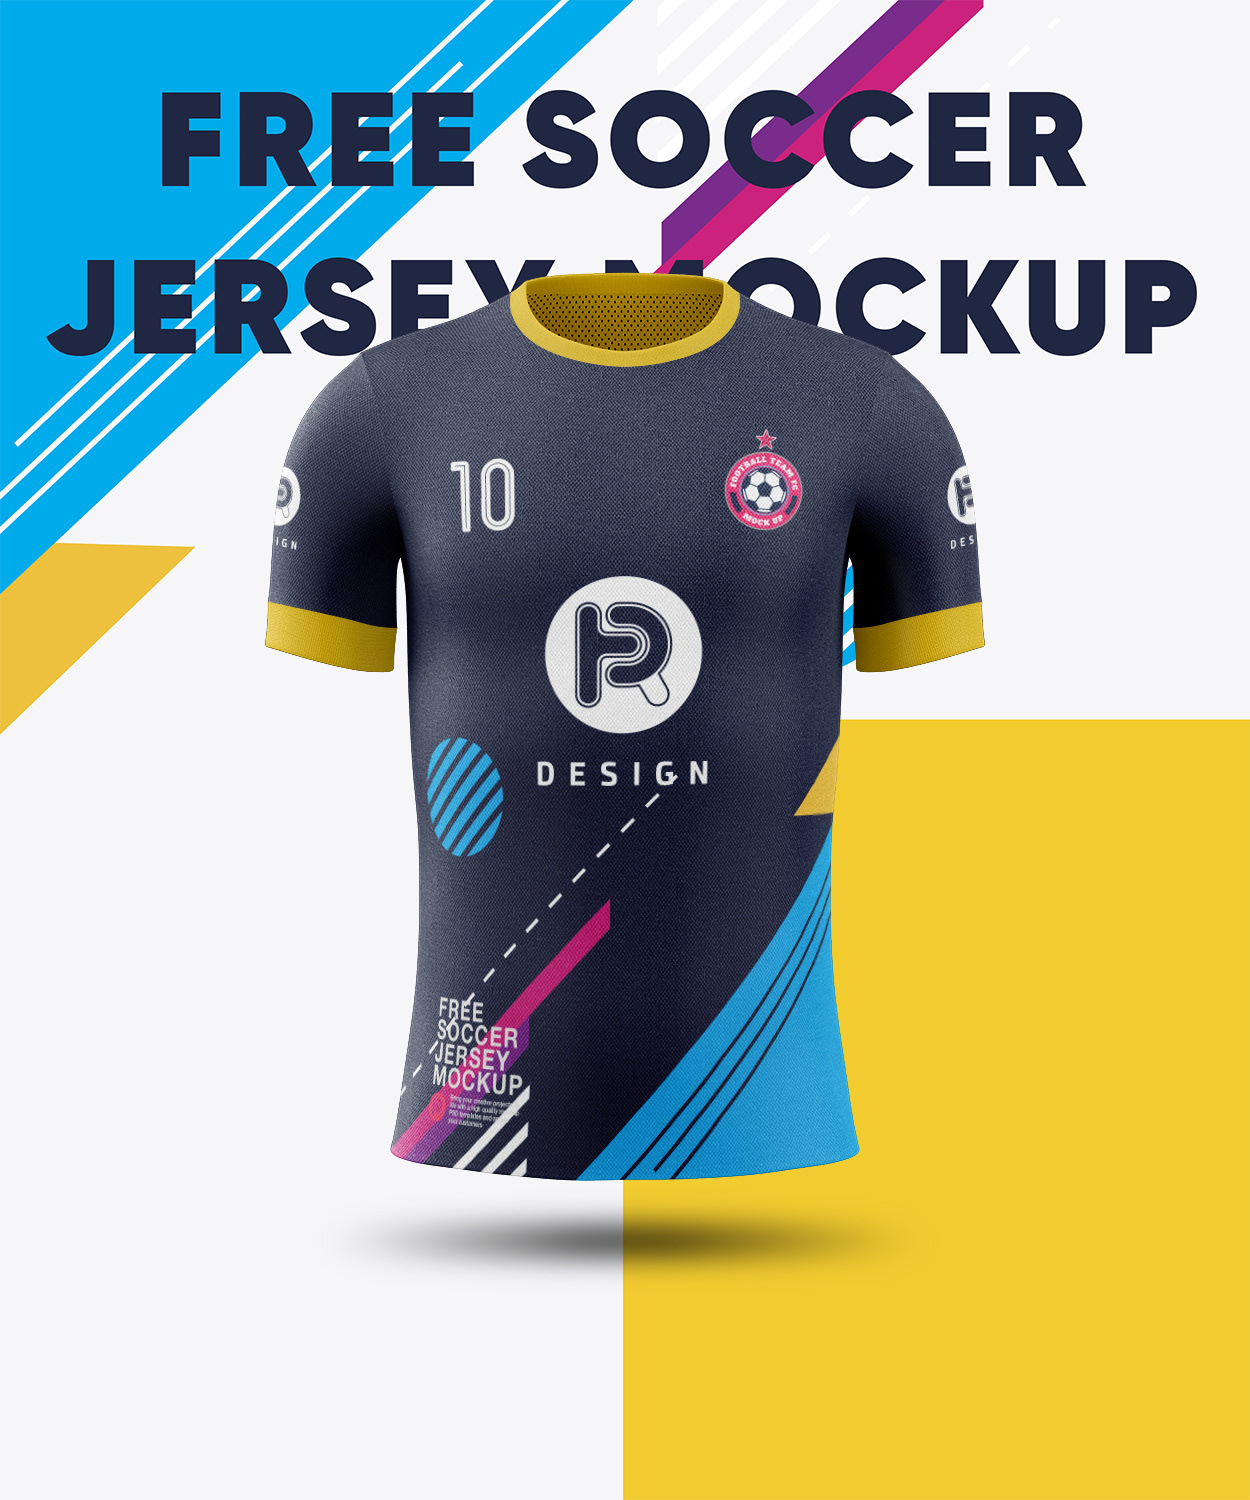 Download Free Soccer Jersey Mockup Front View On Behance Free Mockups